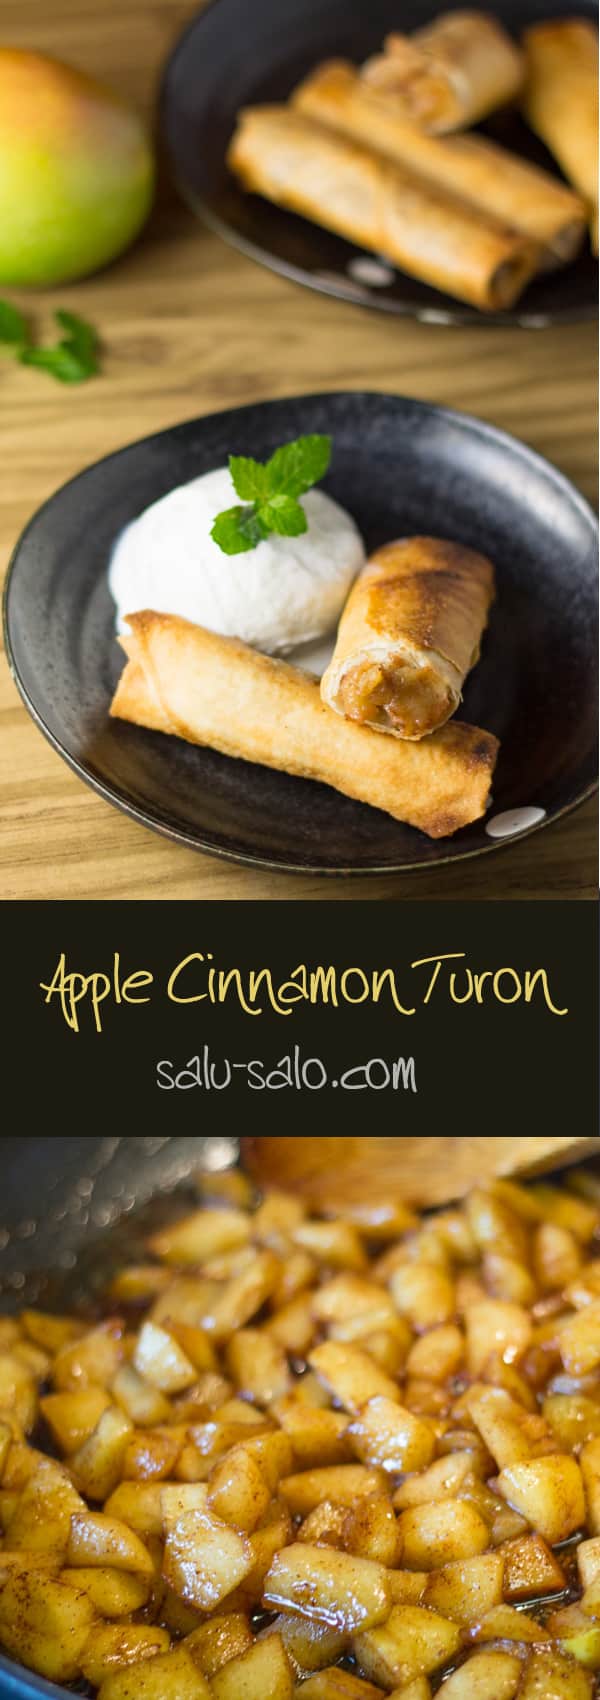 Apple cinnamon turon long photo with text in the center